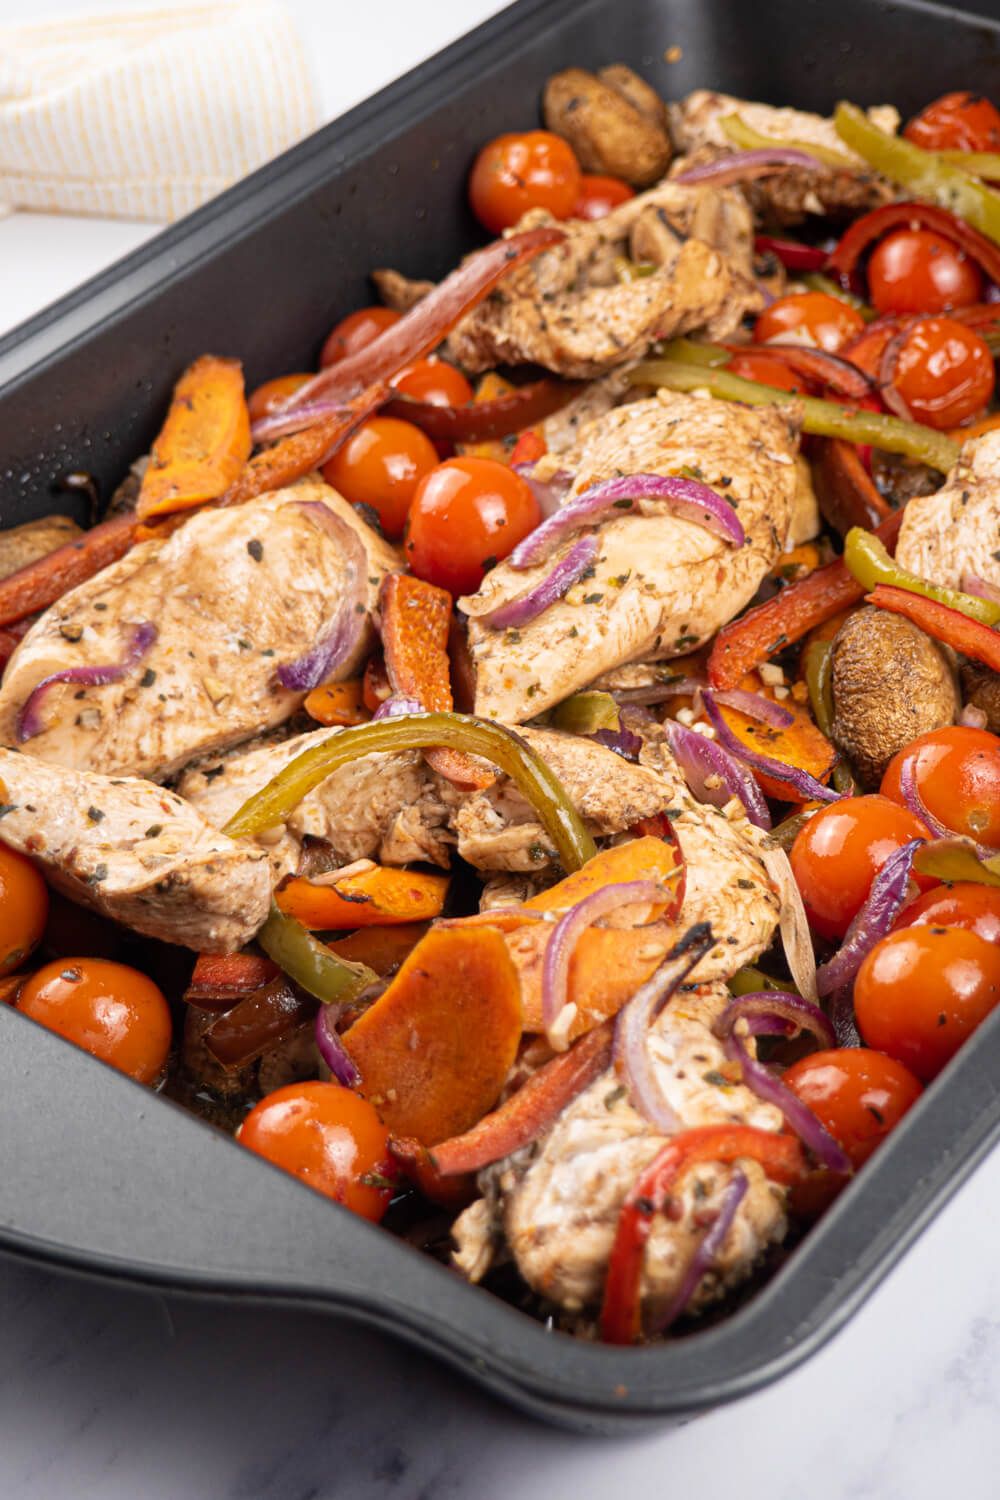 Balsamic chicken and vegetables and a sheet pan with a yellow striped napkin.